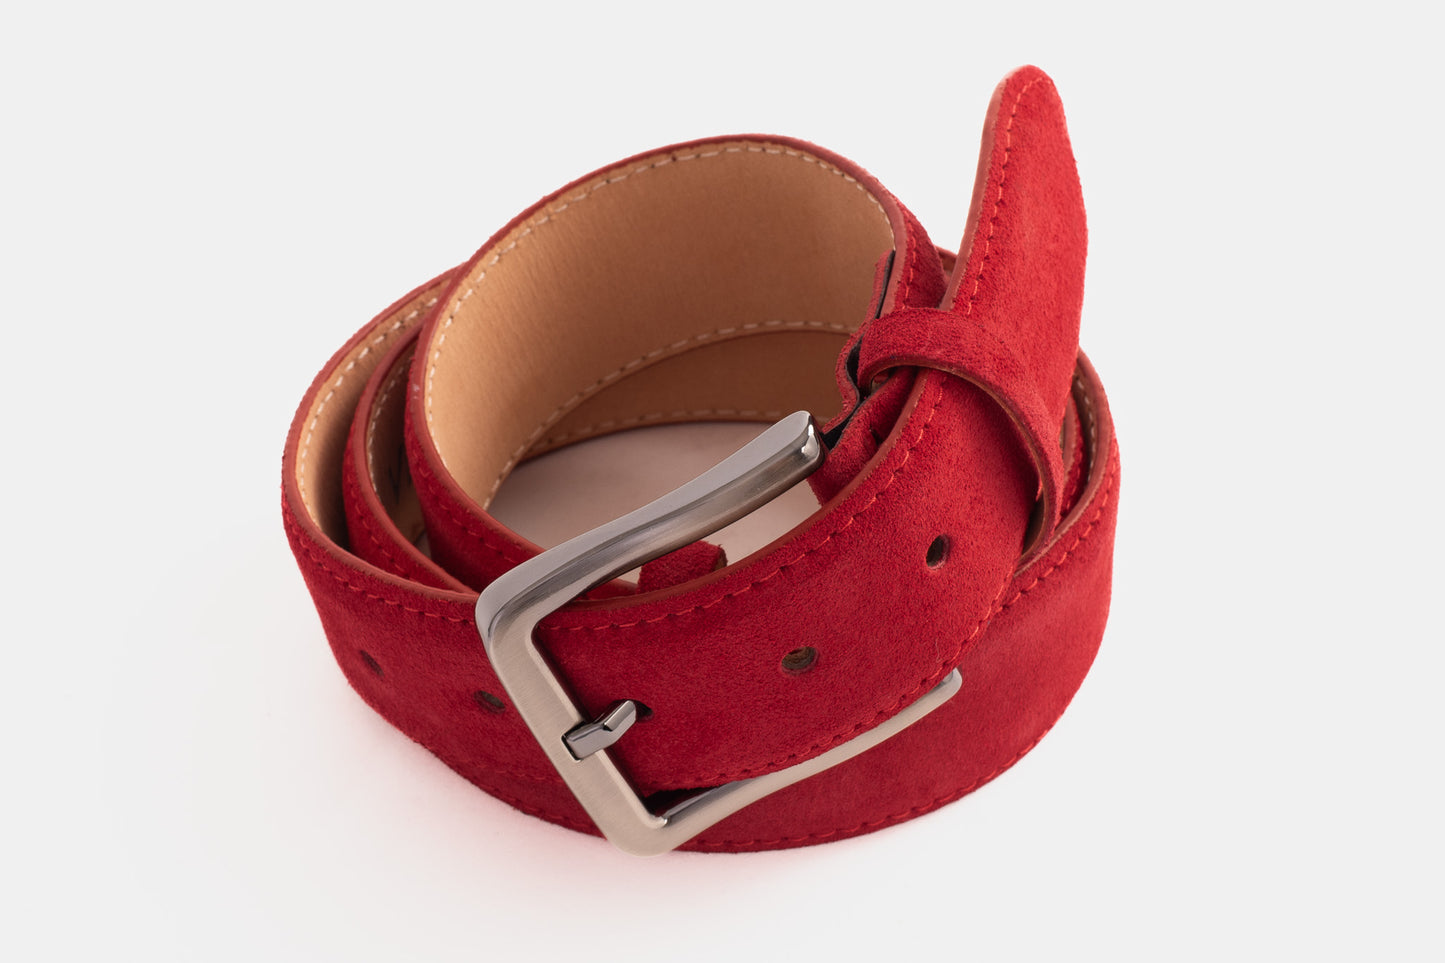 The Bari Red Suede Leather Belt